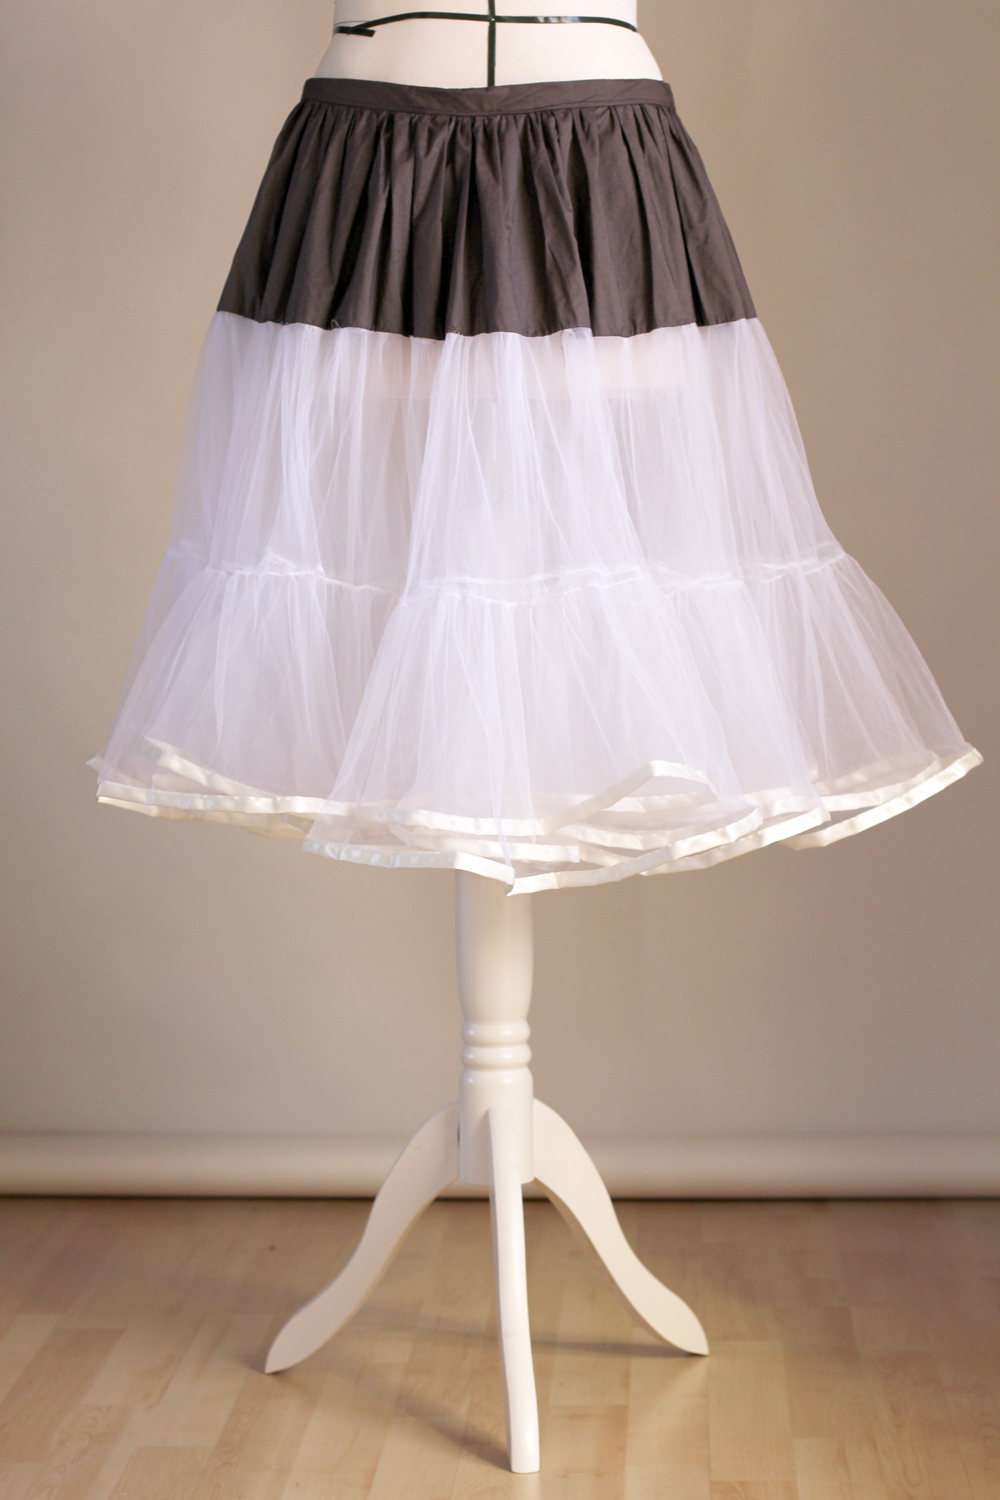 Petticoat tutorial by Thisblogisnotforyou.com